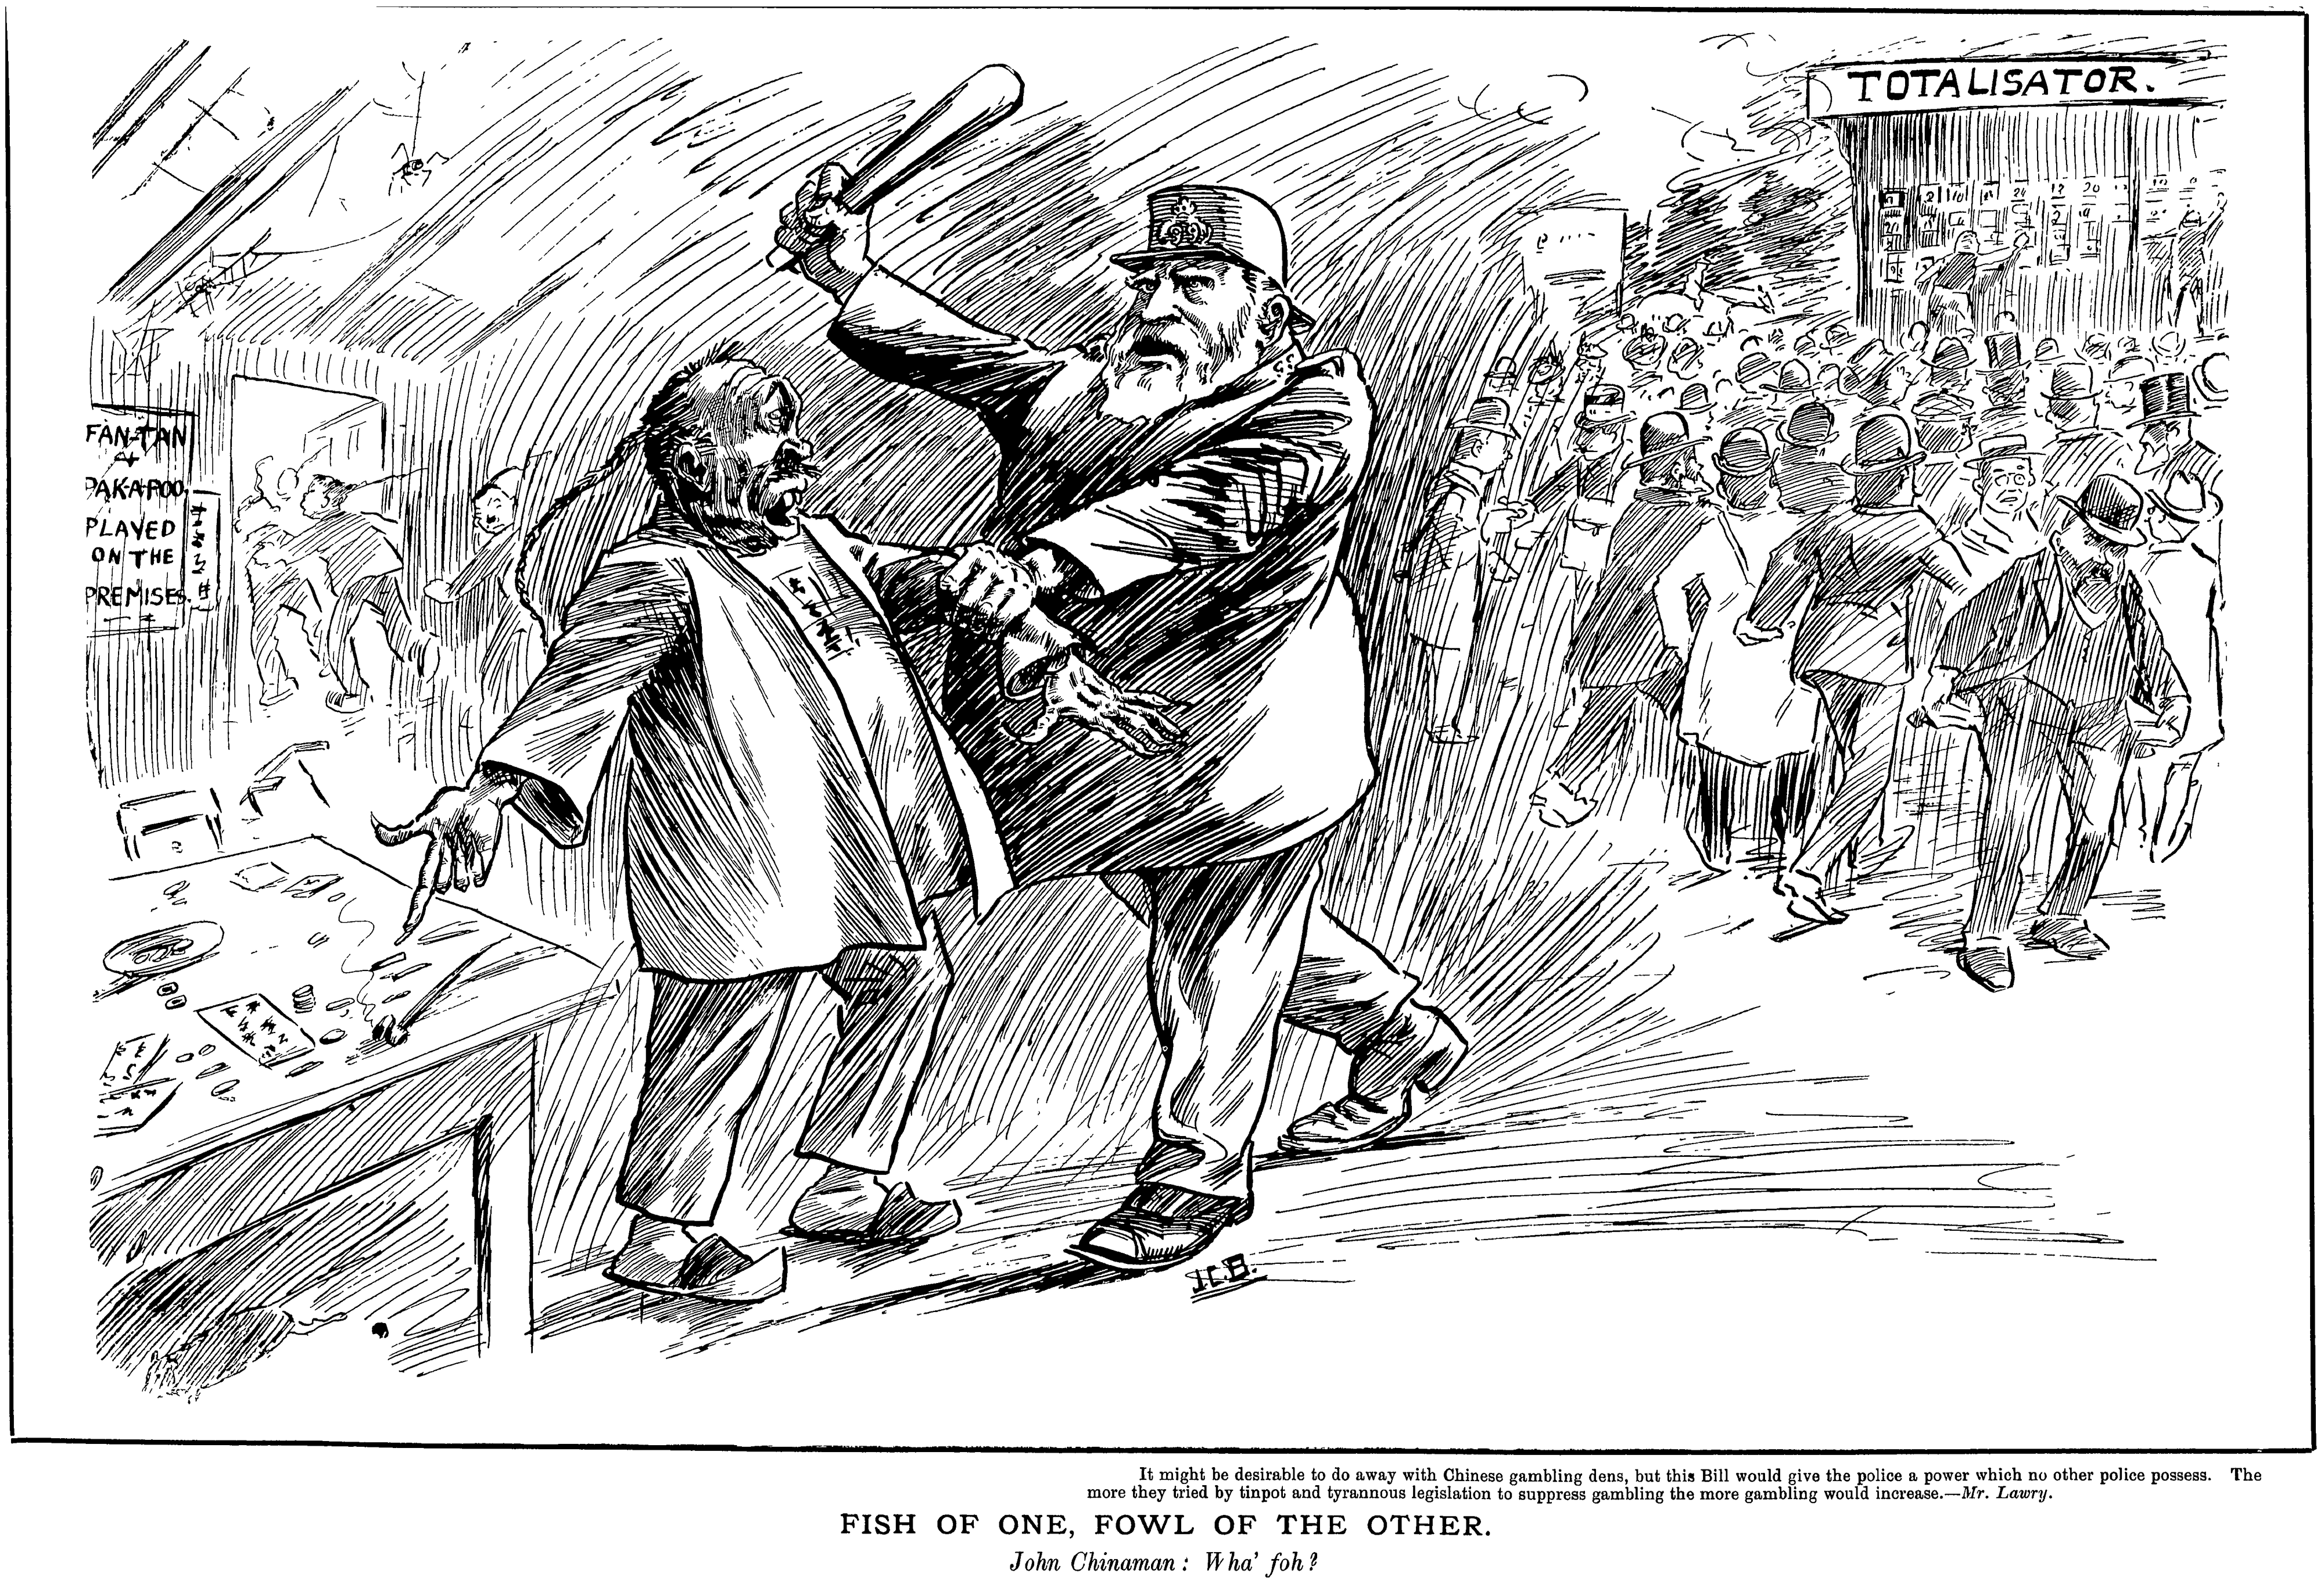 A cartoon: a policeman threatens a Chinese man running a fan-tan/pak-a-poo shop, whilst behind him European men attend the totalisator without penalty. The caption reads 'it might be desirable to do away with Chinese gambling dens, but this Bill would give the police a power which no other police possess. The more they tried by tinpt and tyrannous legislation to suppress gambling the more gambling would increase.—Mr. Lawry', then 'Fish of One, Fowl of the Other', then 'John Chinaman: wha' foh?'